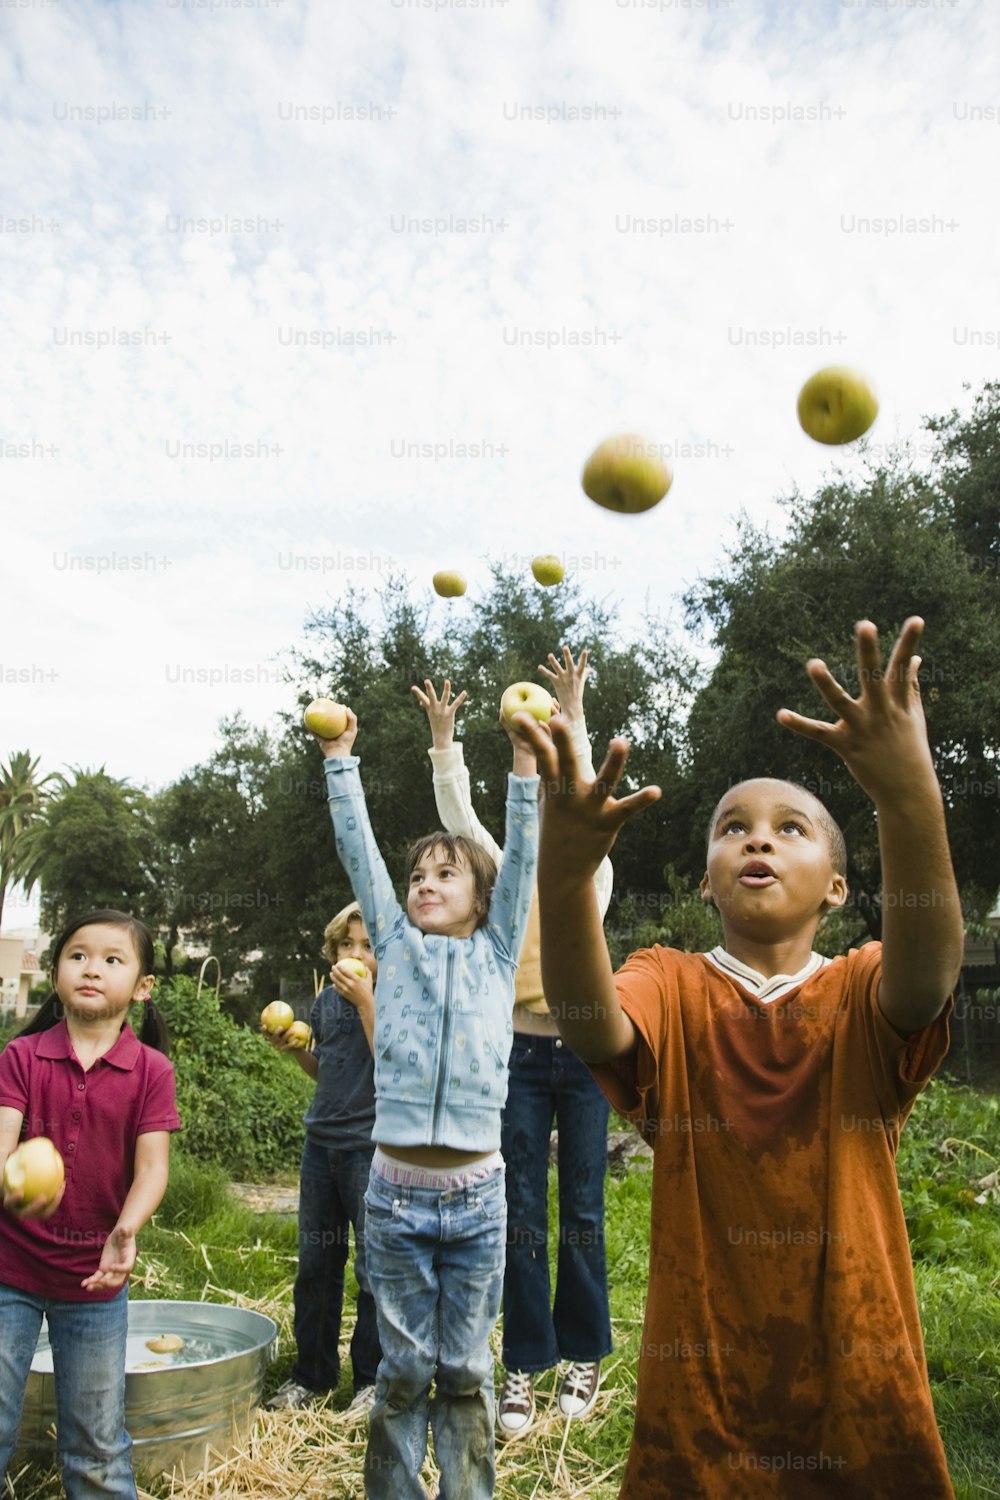 a group of children are throwing apples in the air